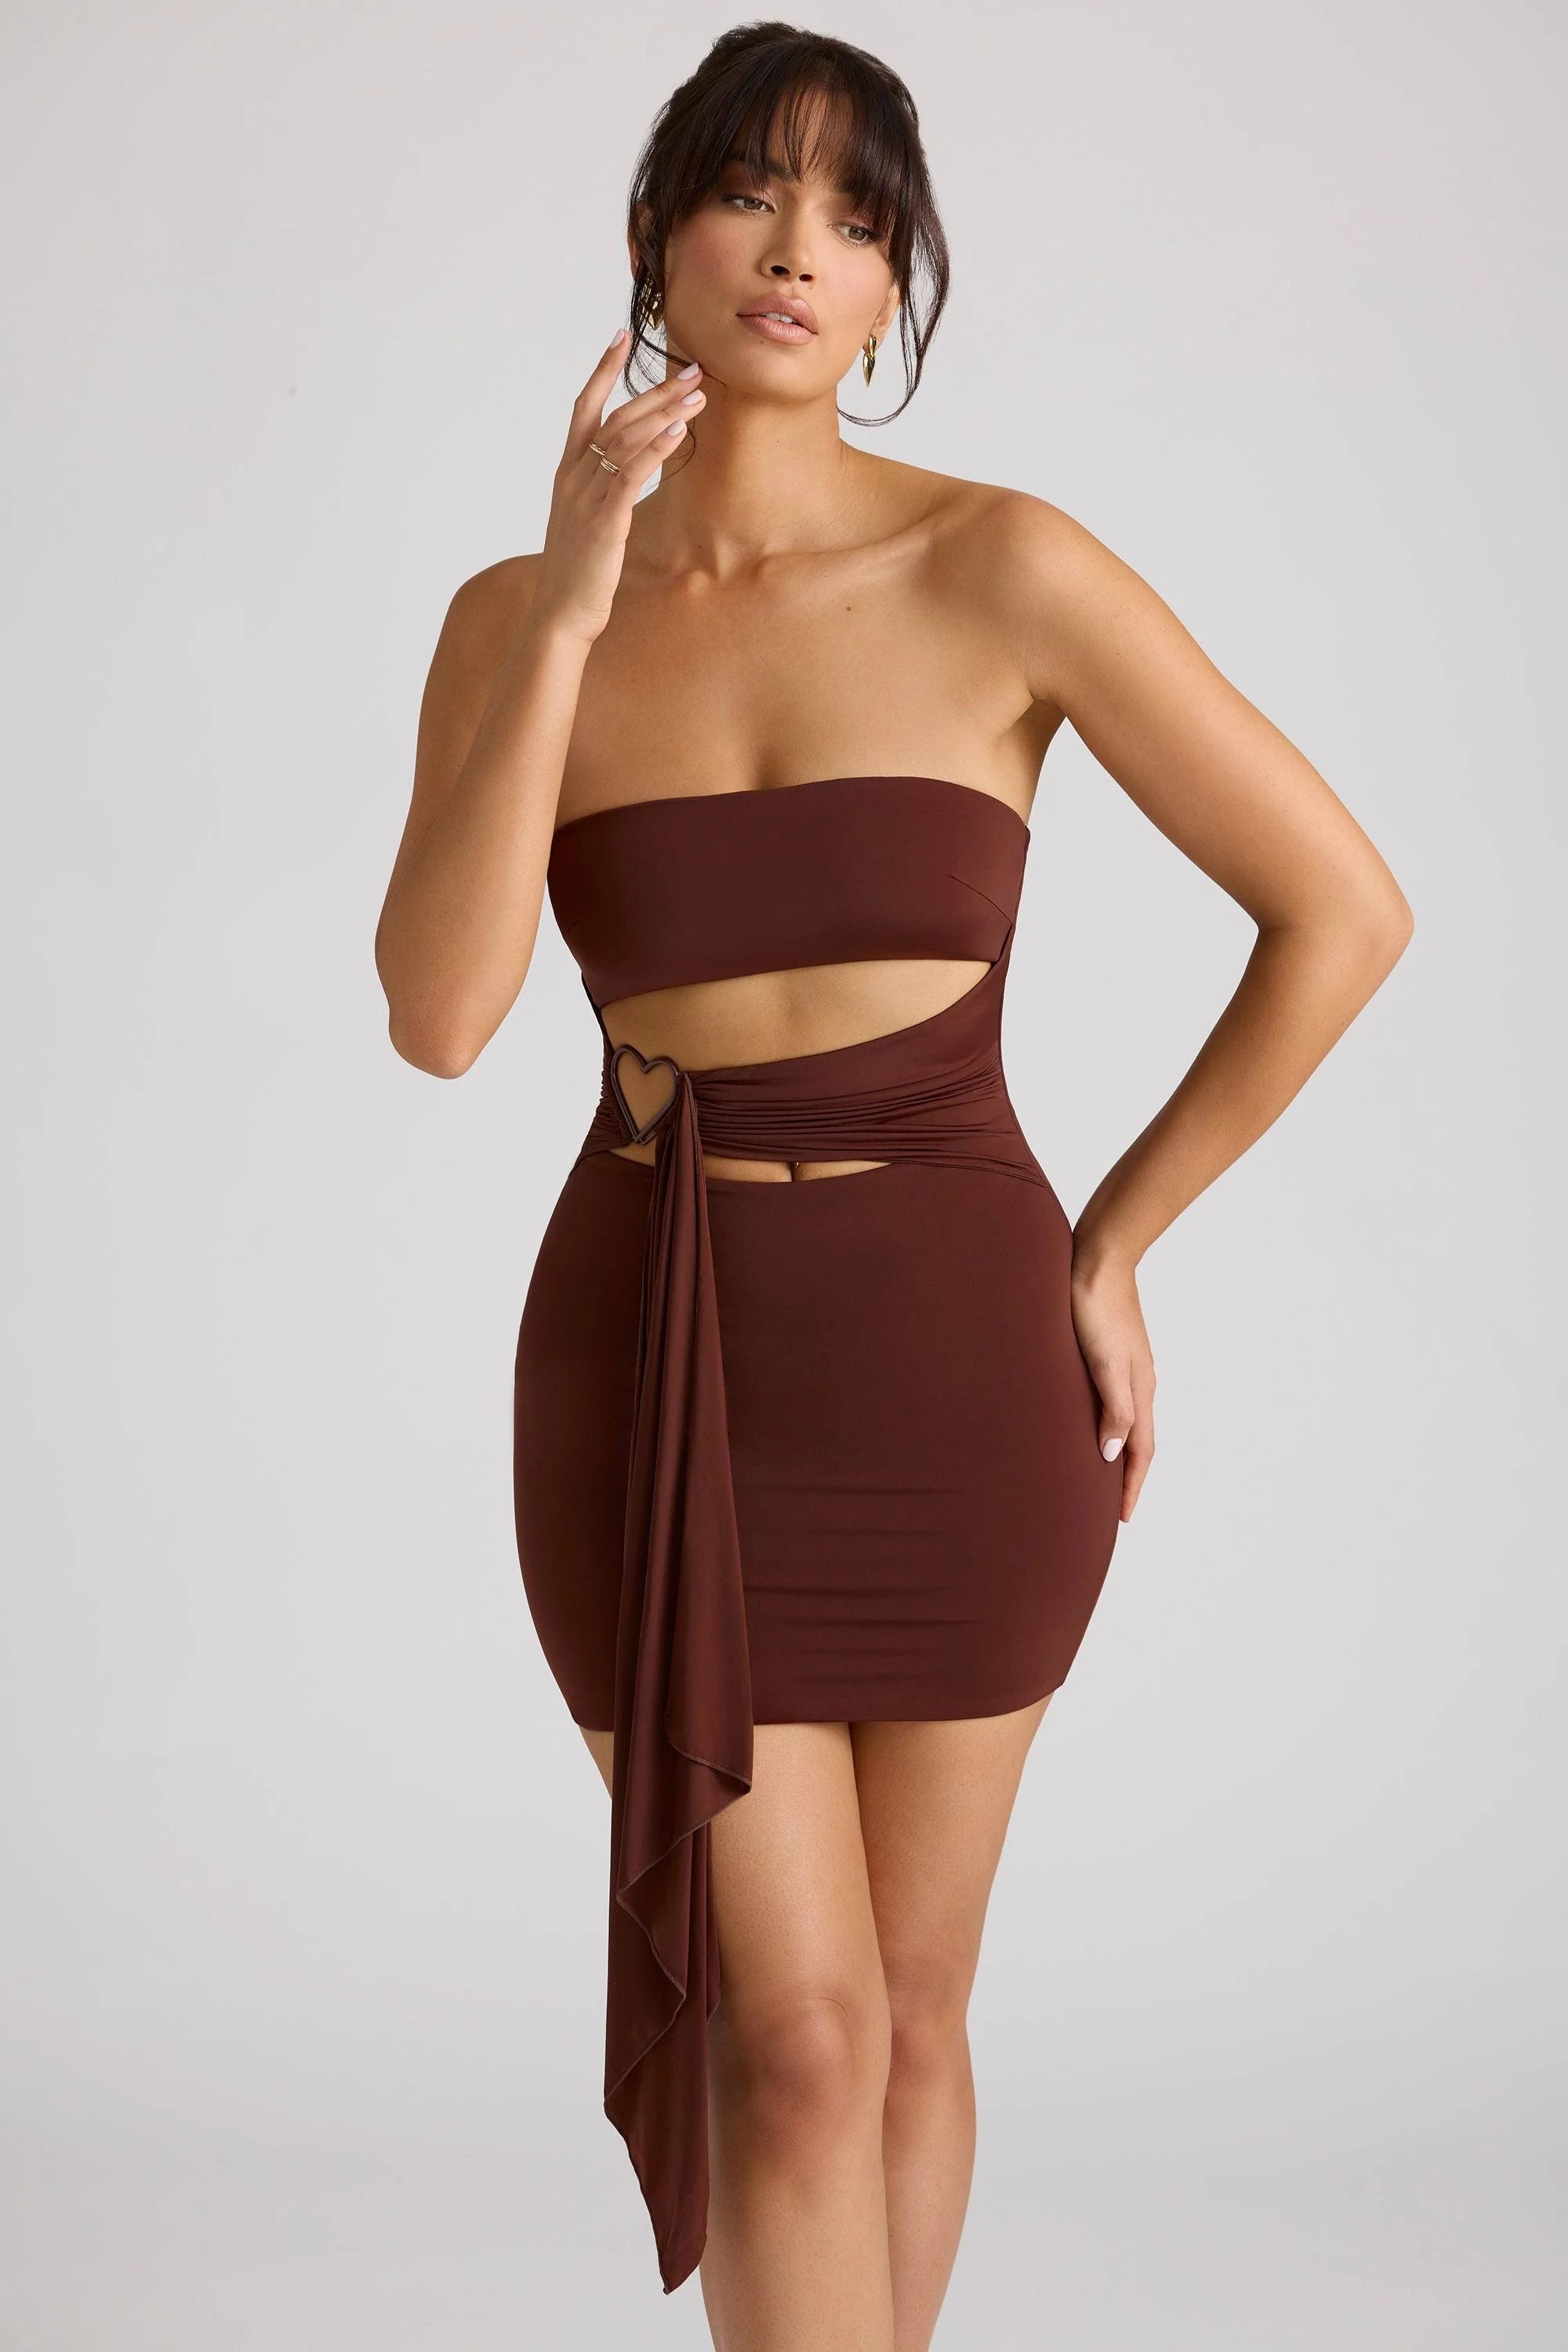 Strapless Brown Bandeau Mini Dress for a Stylish Date | Image